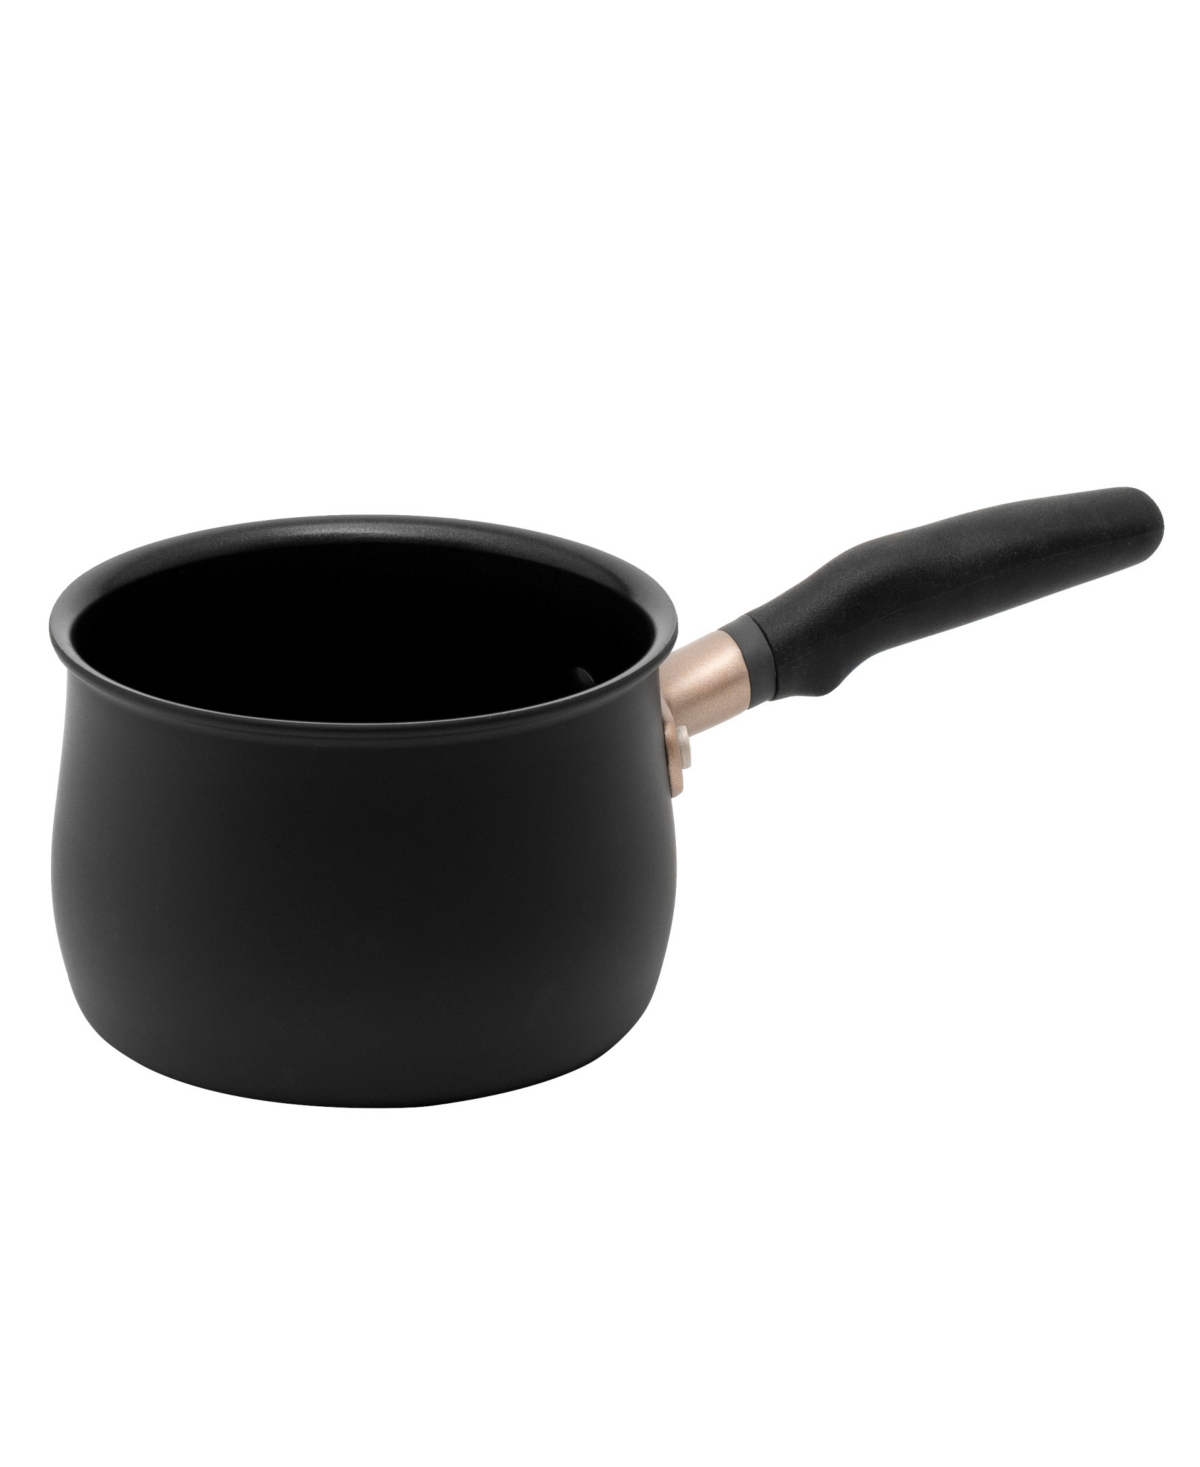 Meyer Accent Series Hard Anodized Alum 2-quart Non-stick Saucepan In Matte Black With Gold Accent